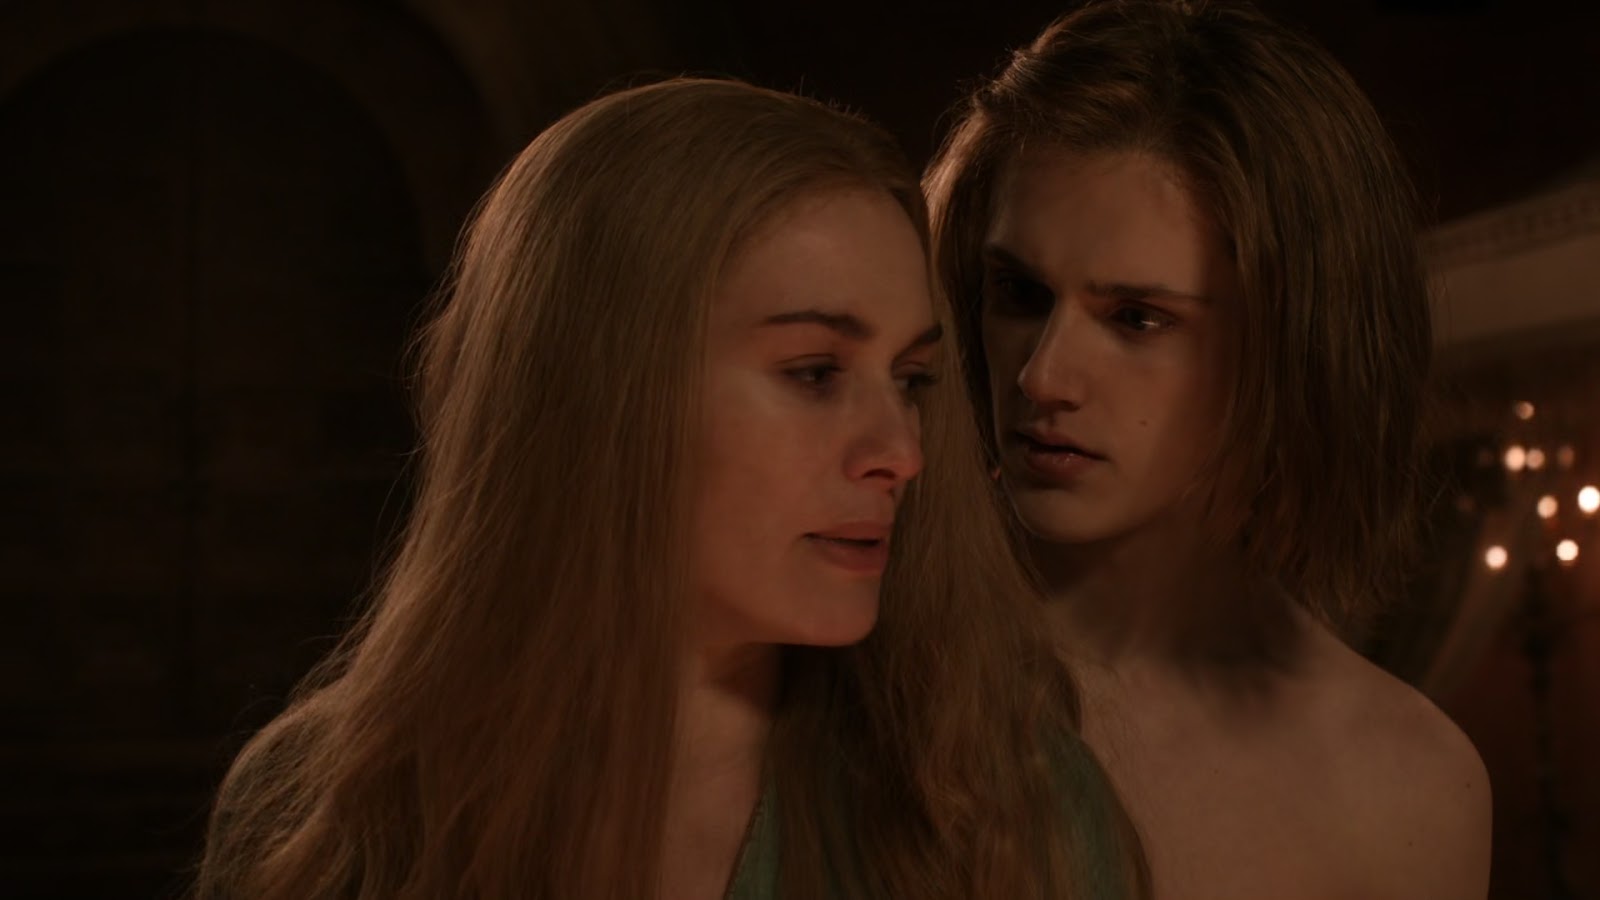 Eugene Simon nude in Game Of Thrones 1-10 "Fire And Blood" .